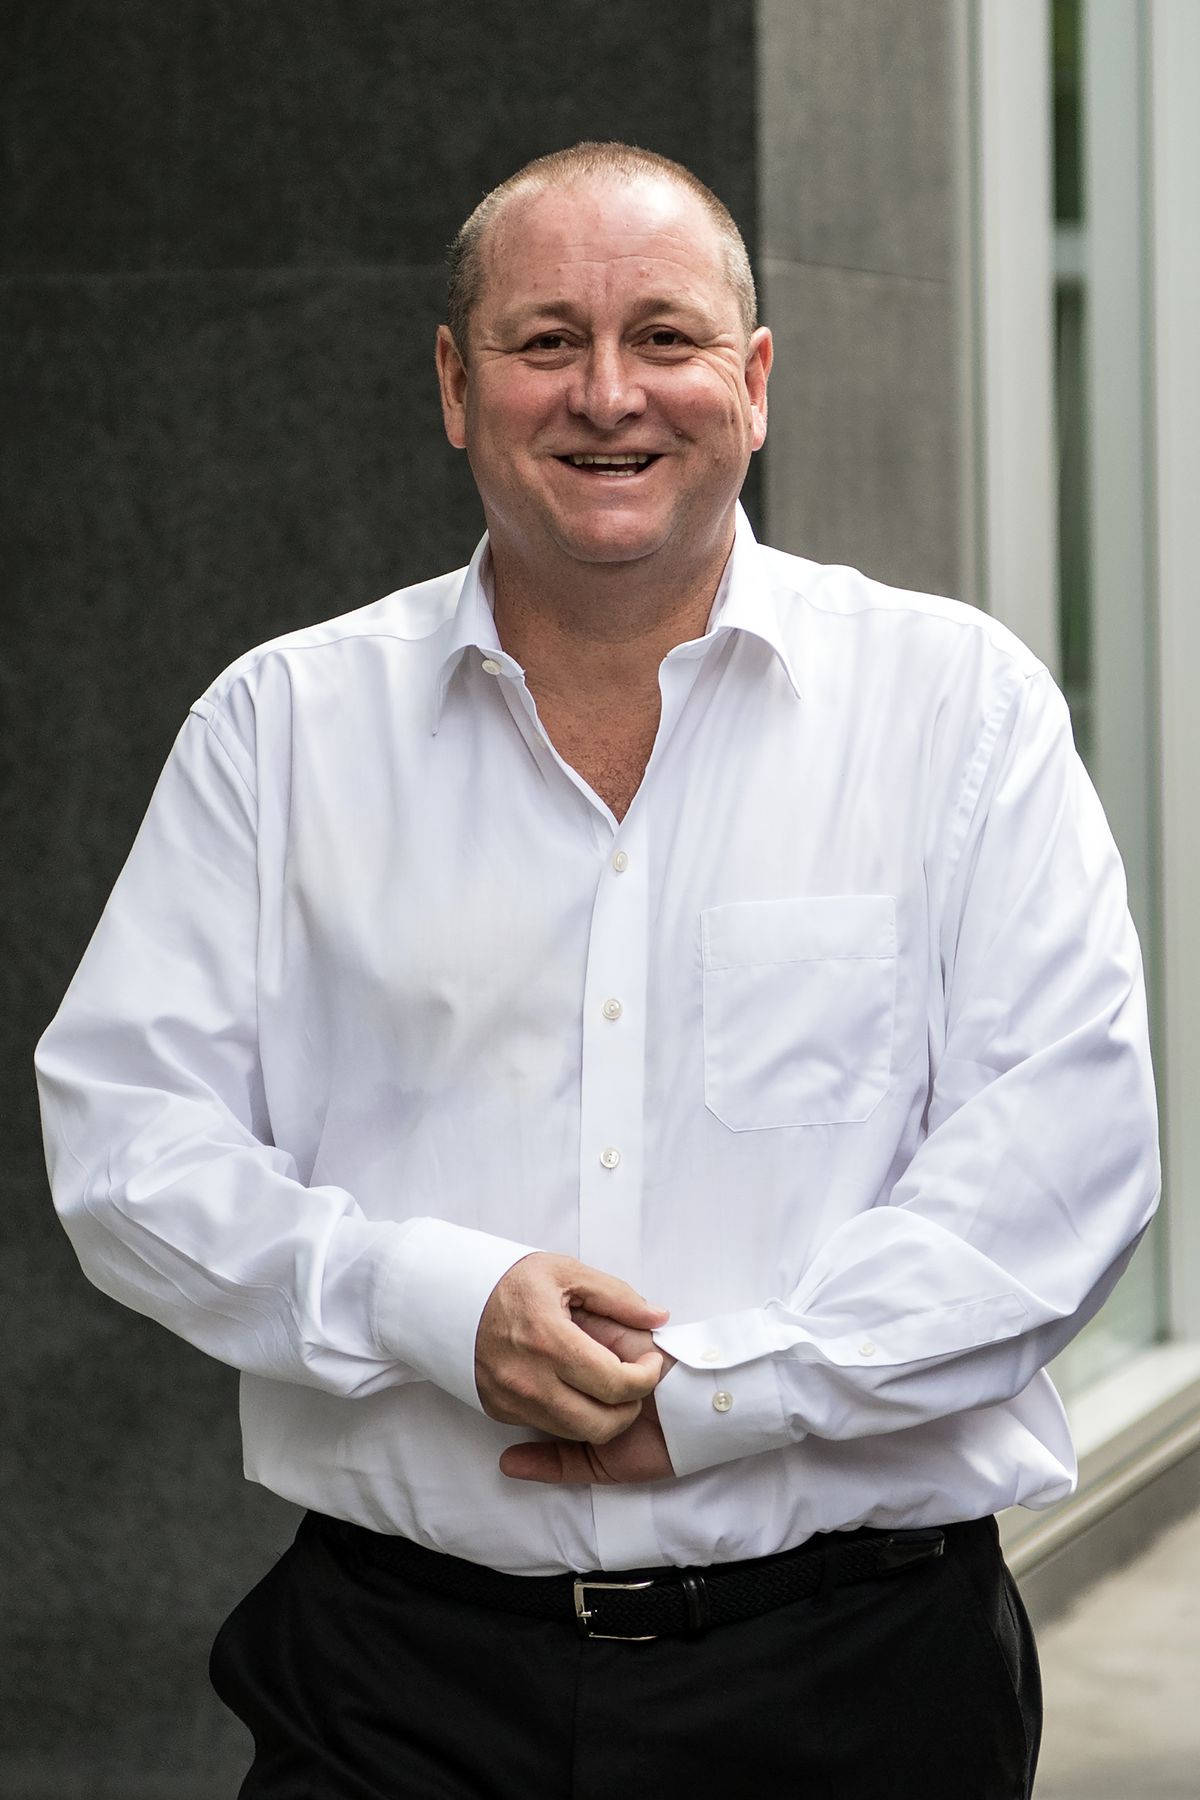 Sports Direct Boss Mike Ashley Attends High Court Over Alleged £15m Banker Deal